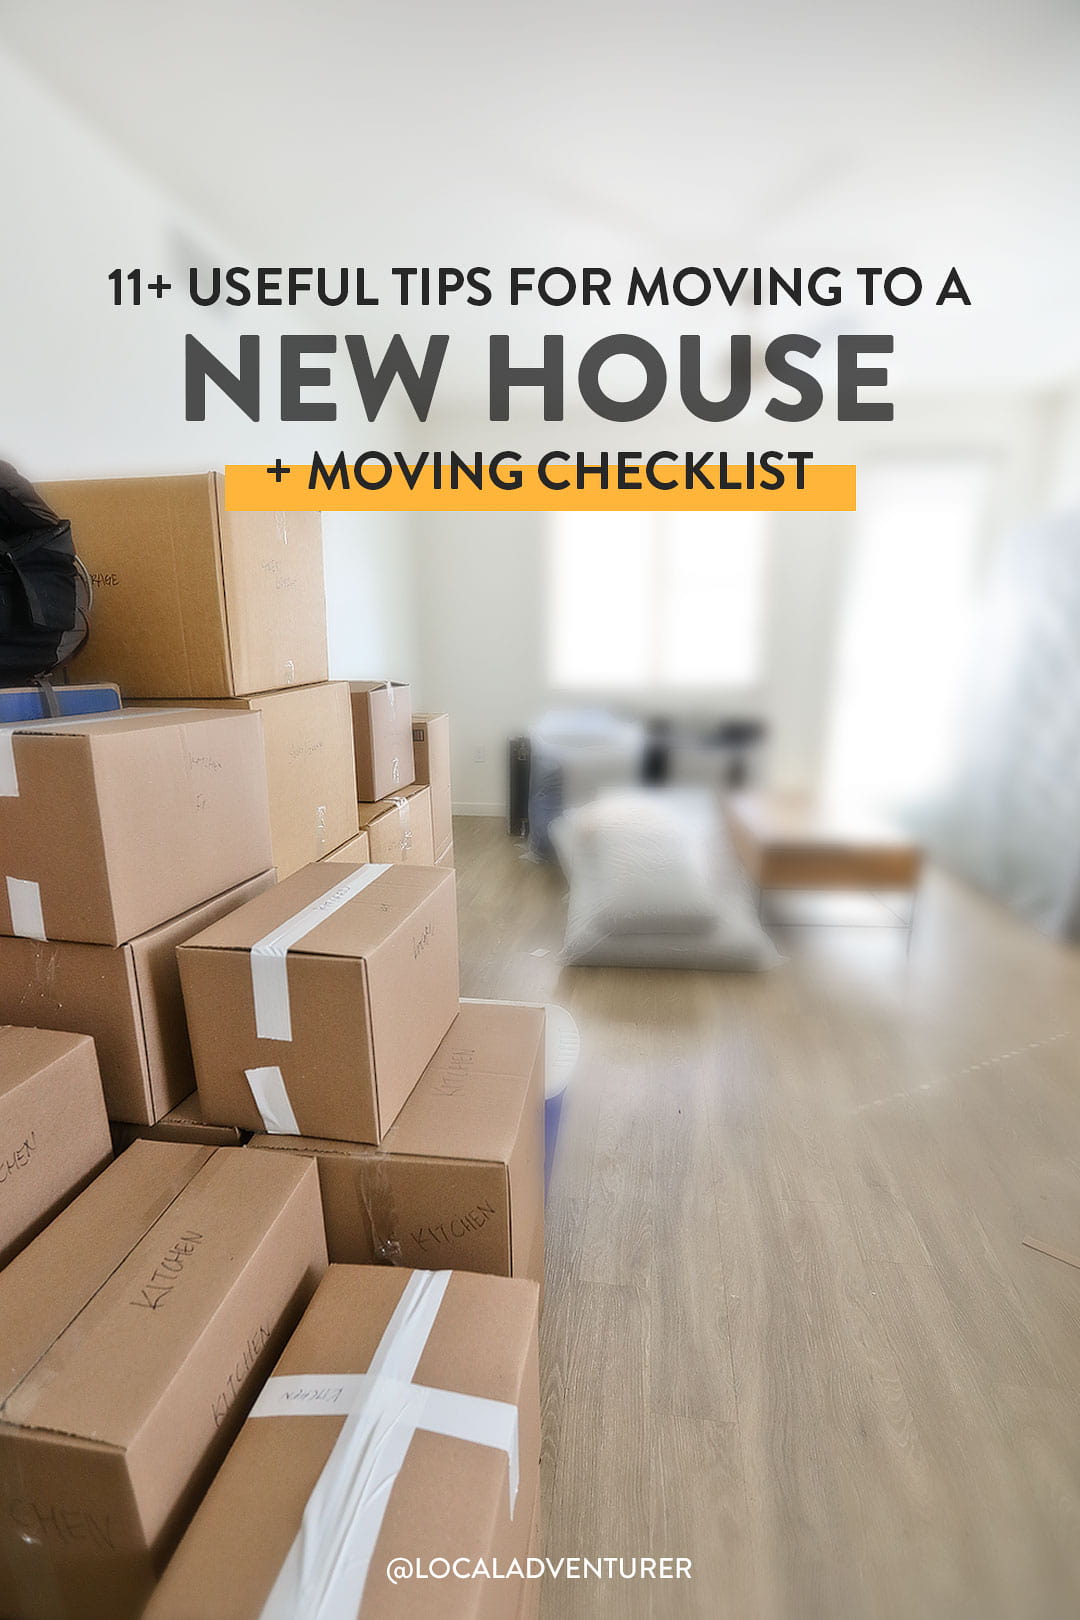 11+ Useful Tips for Moving to a New House